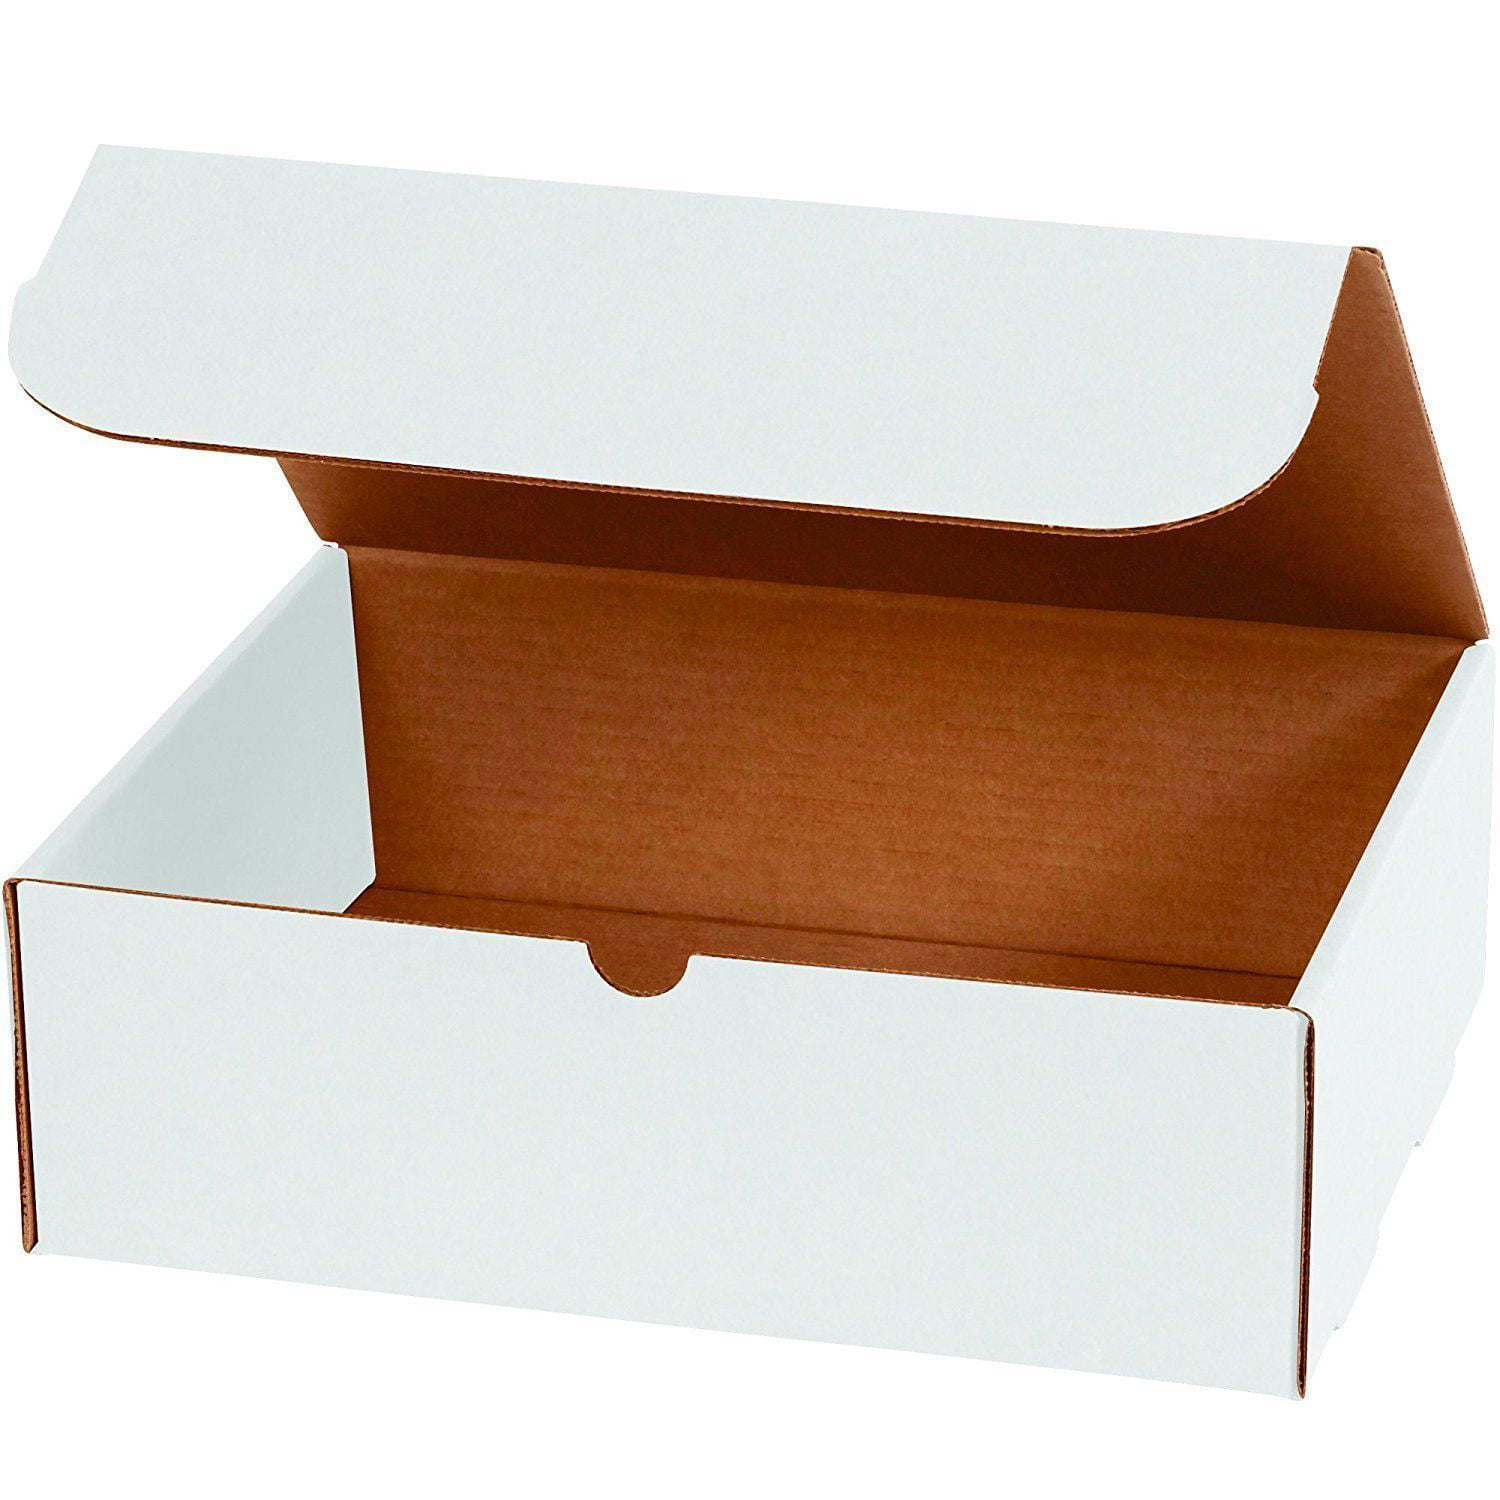 Details about   50-12x2x2 White Corrugated Shipping Mailer Packing Box Boxes 12 x 2 x 2